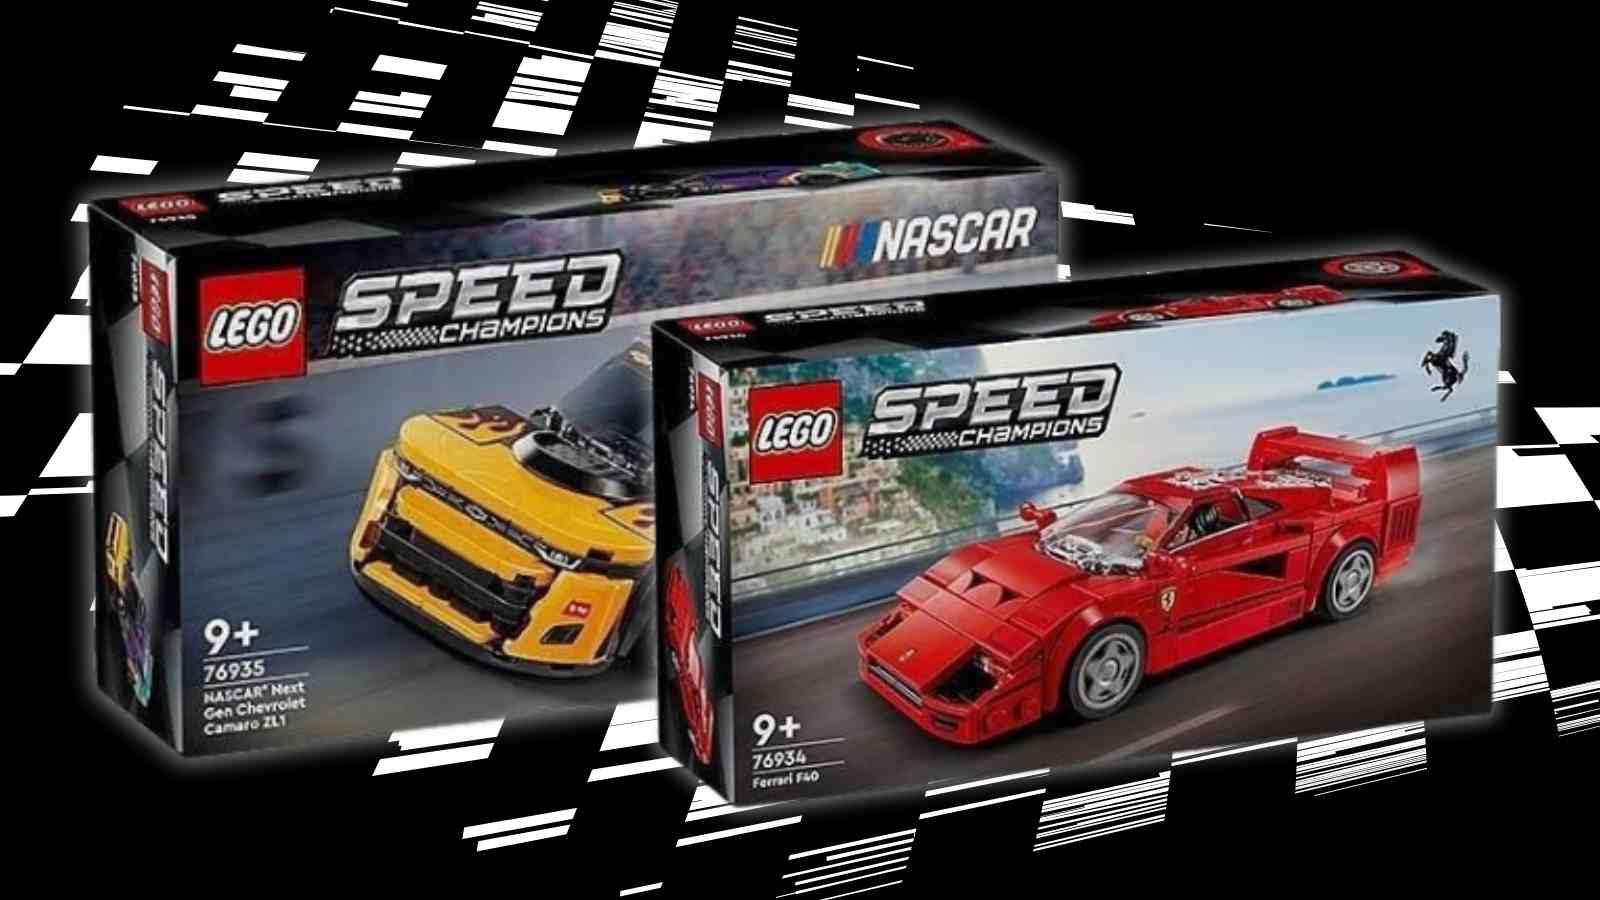 Upcoming LEGO Speed Champions on black background with racing flag graphic